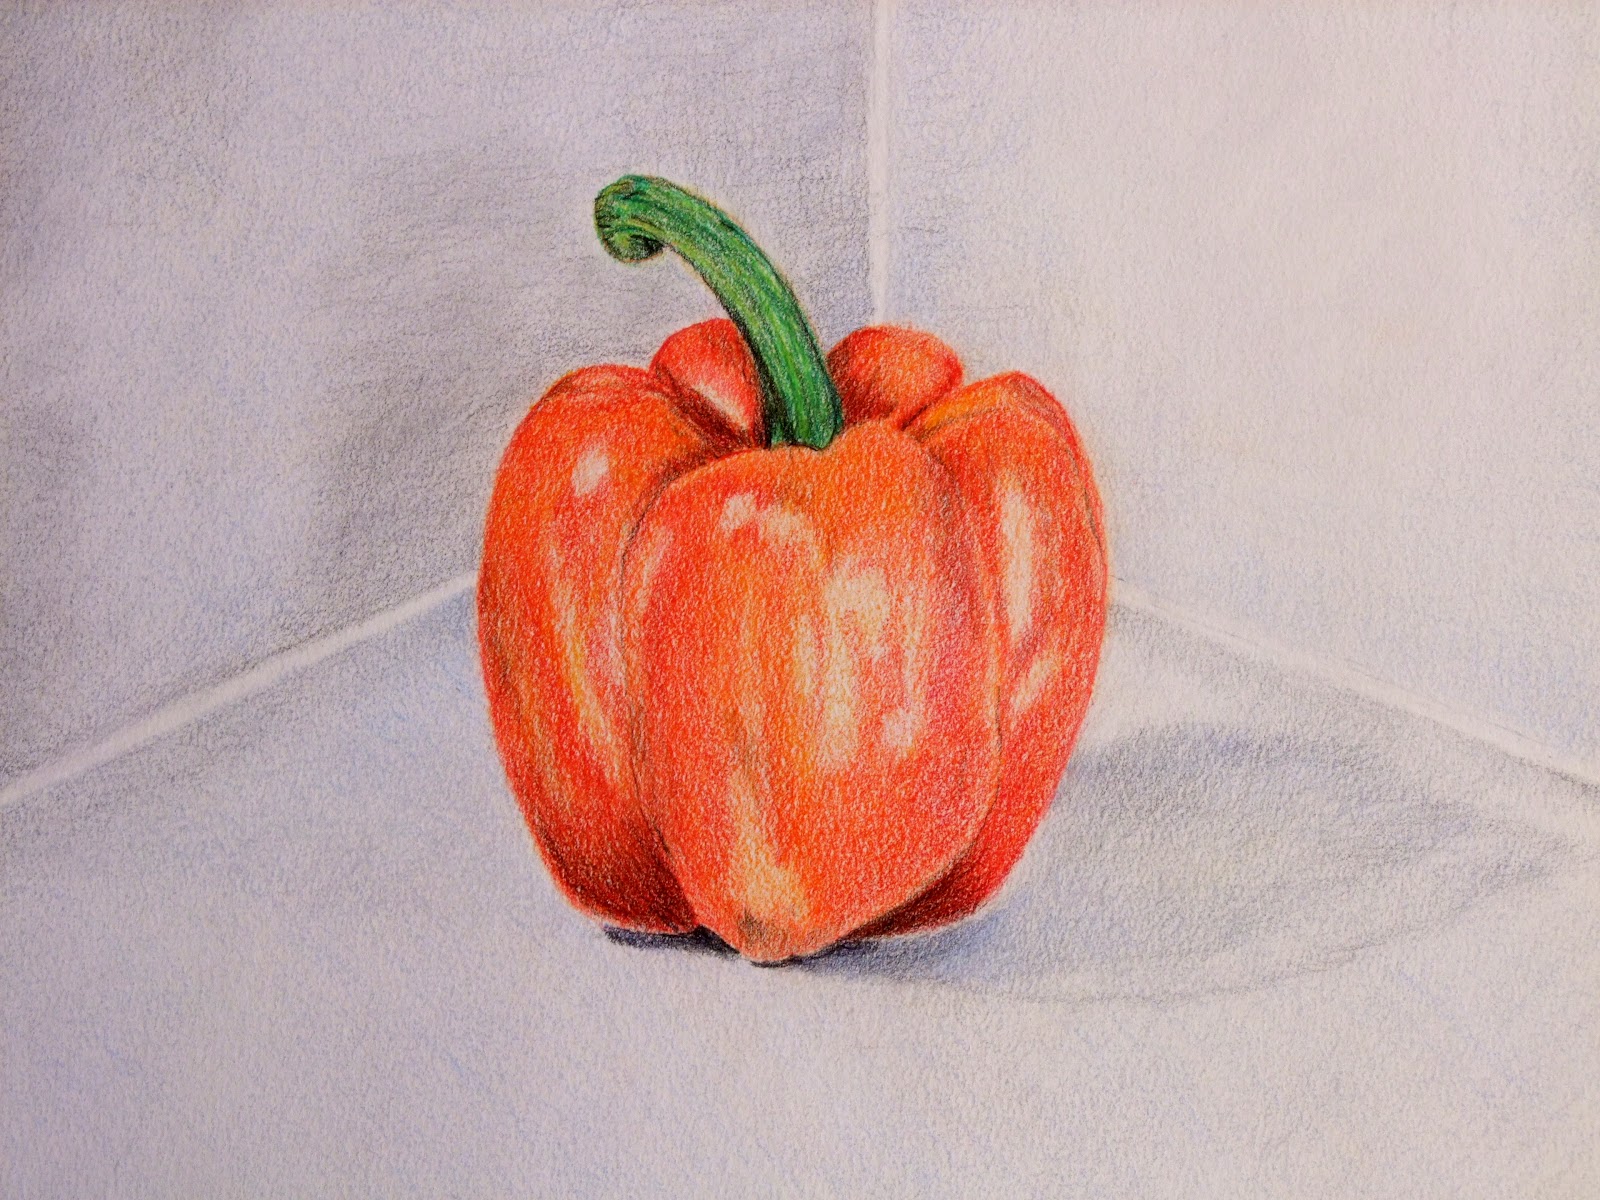 My Artbox: "The Perfect Pepper" 8x10.5 Colored Pencil Study on Canson